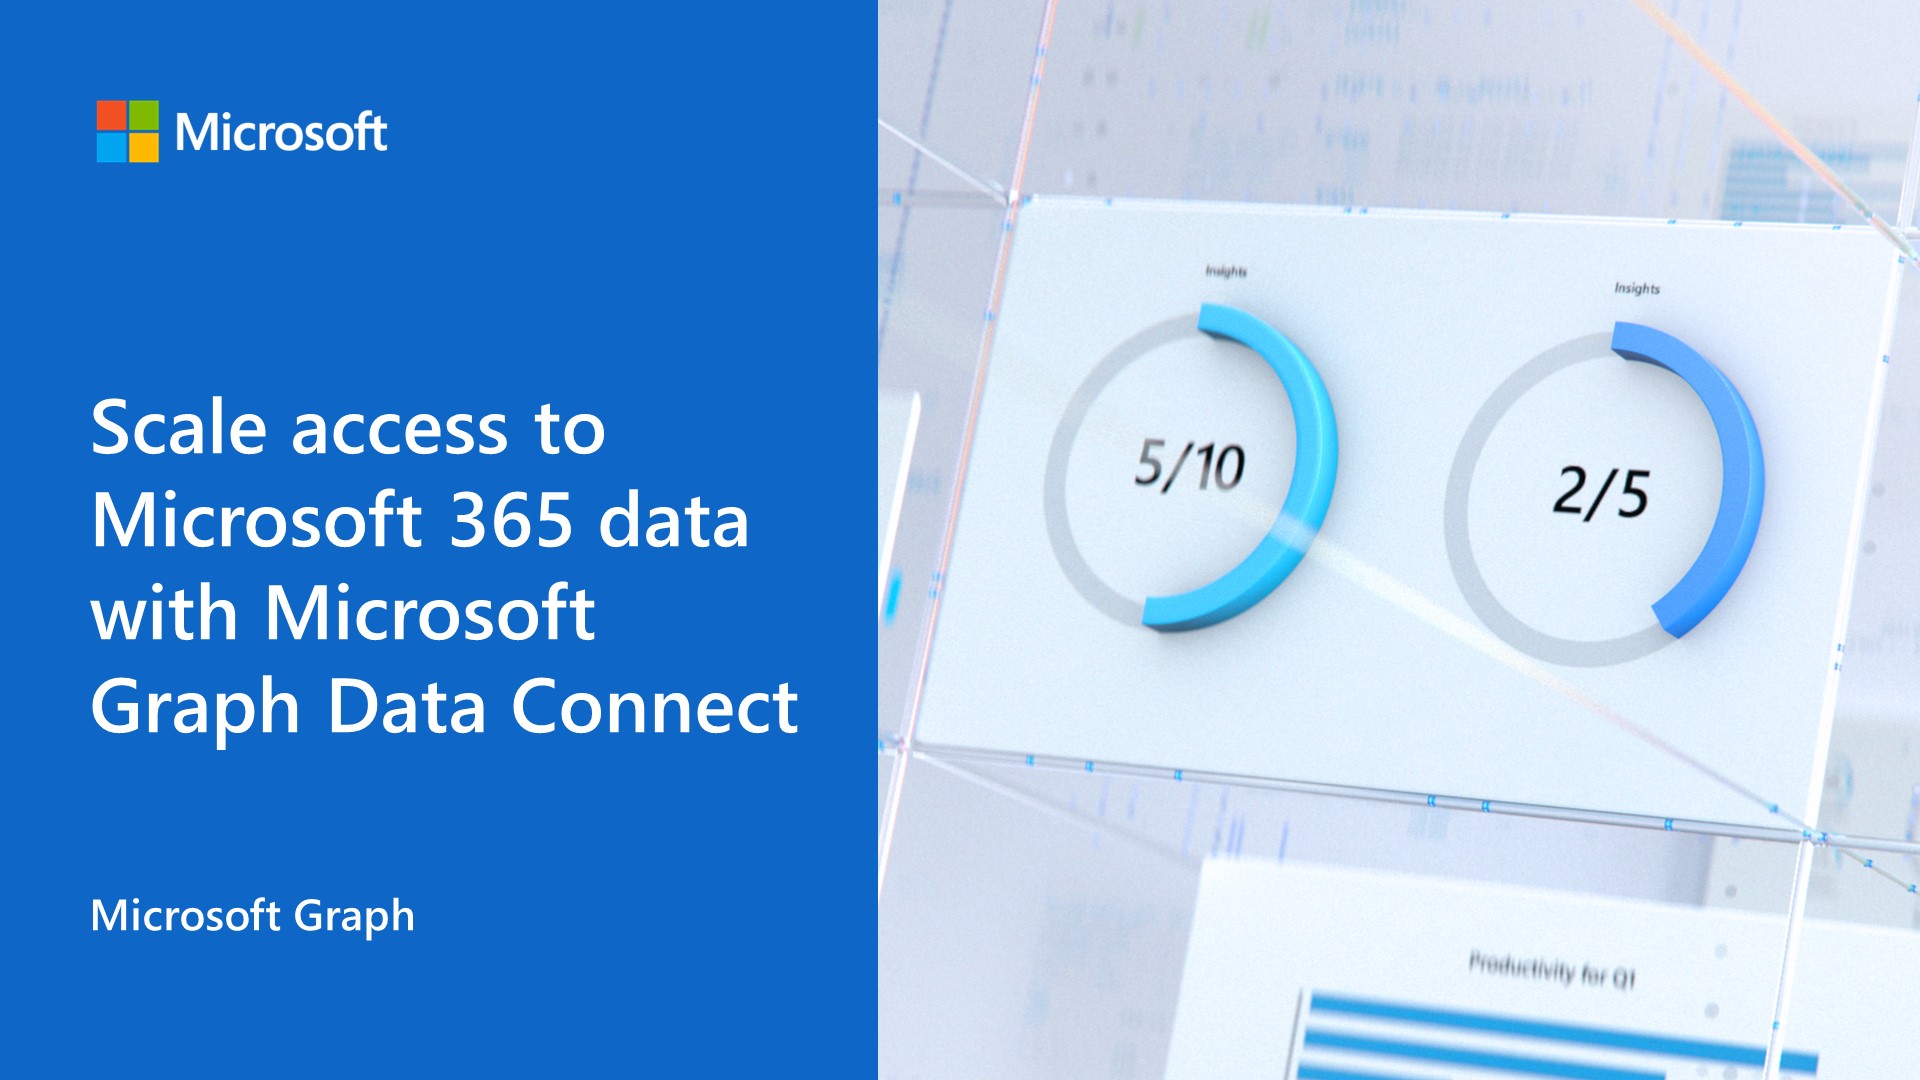 Scale access to Microsoft 365 data with Microsoft Graph Data Connect